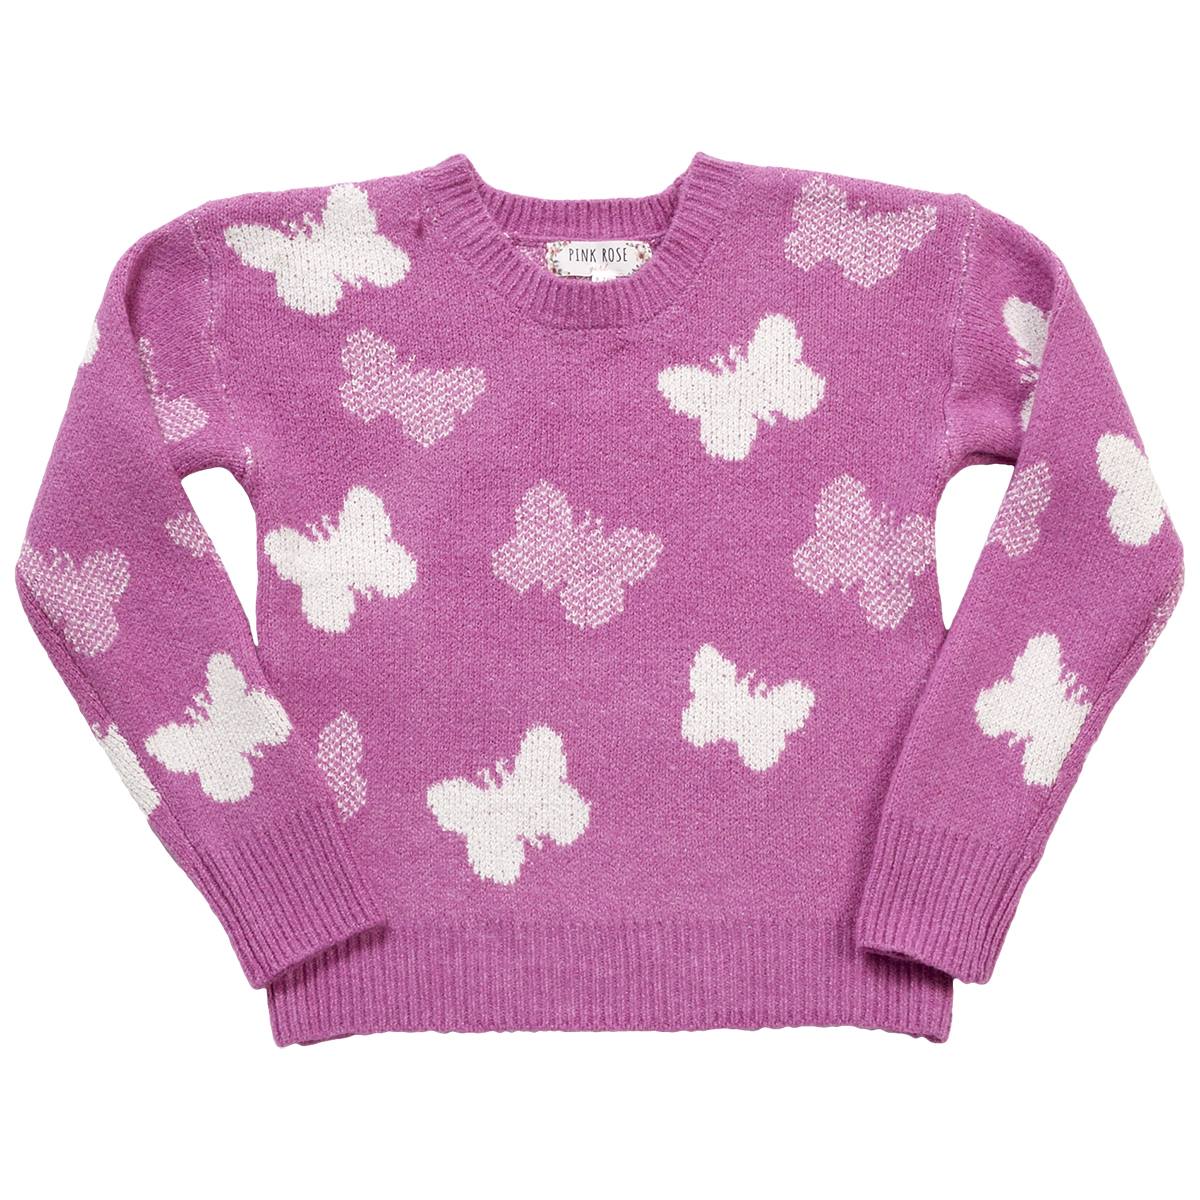 Girls (7-16) Pink Rose Mossy Butterfly Sweater - Berry